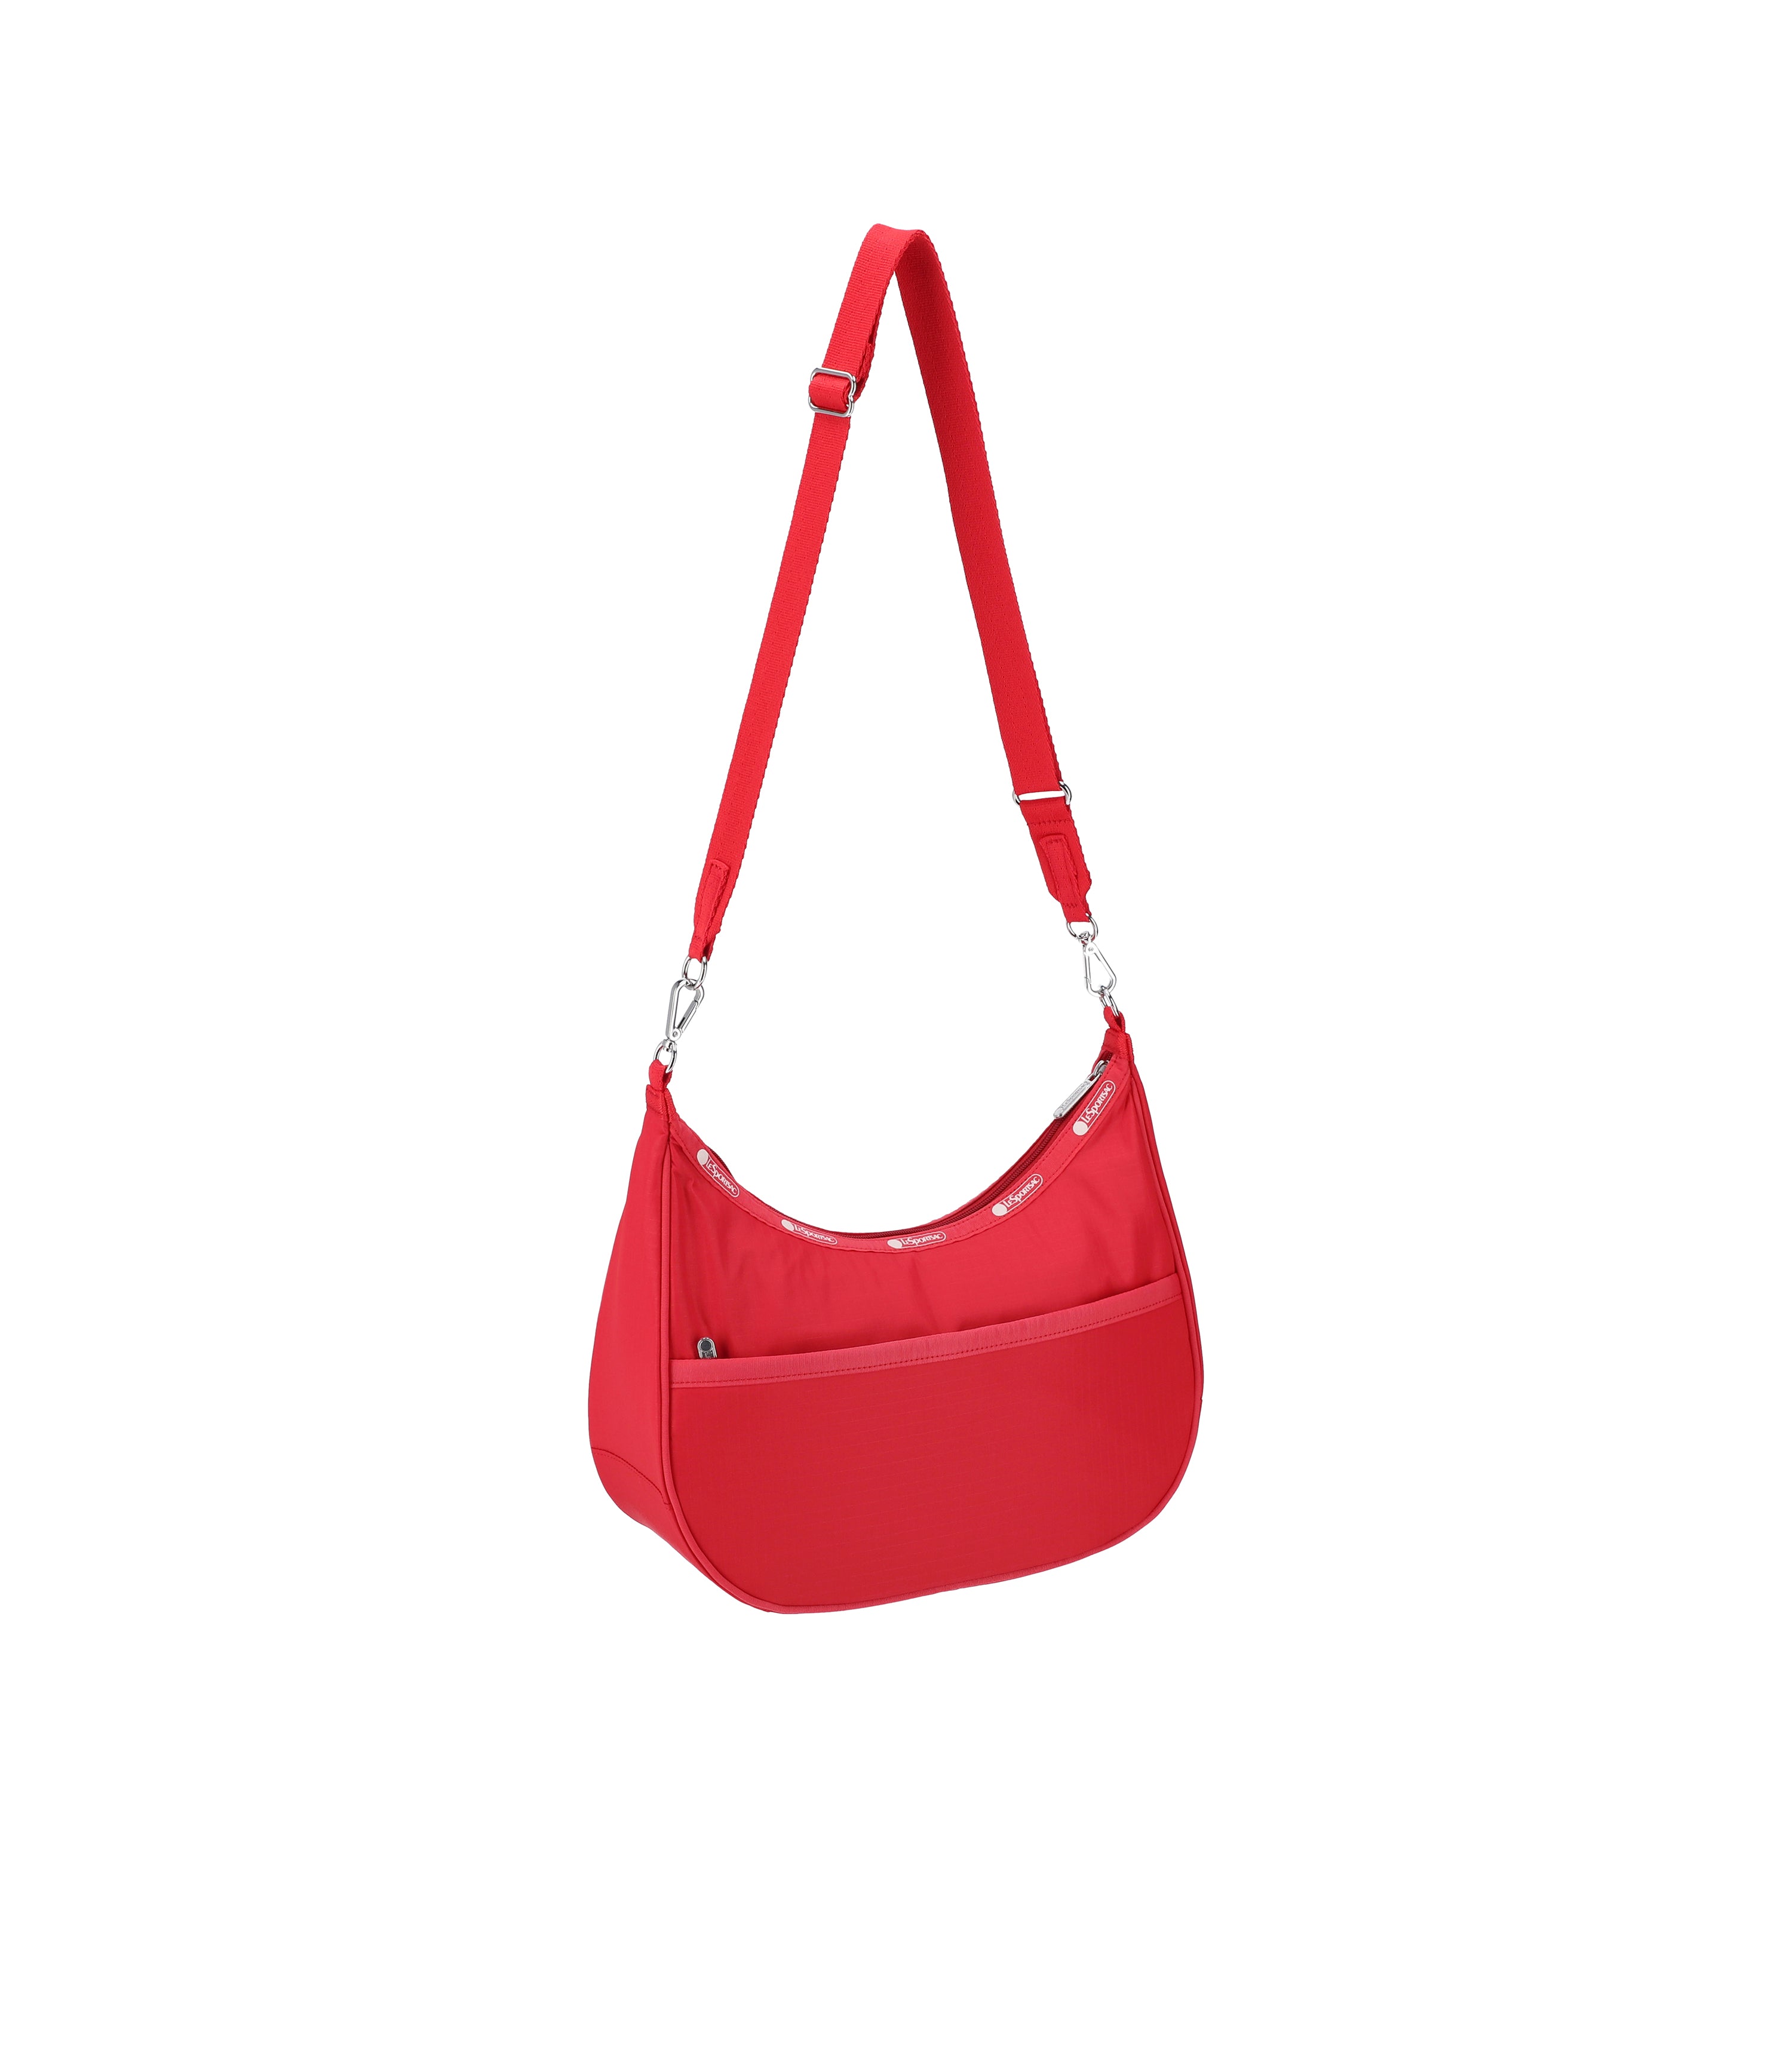 North/South Convertible Hobo - Popsicle Red solid – LeSportsac